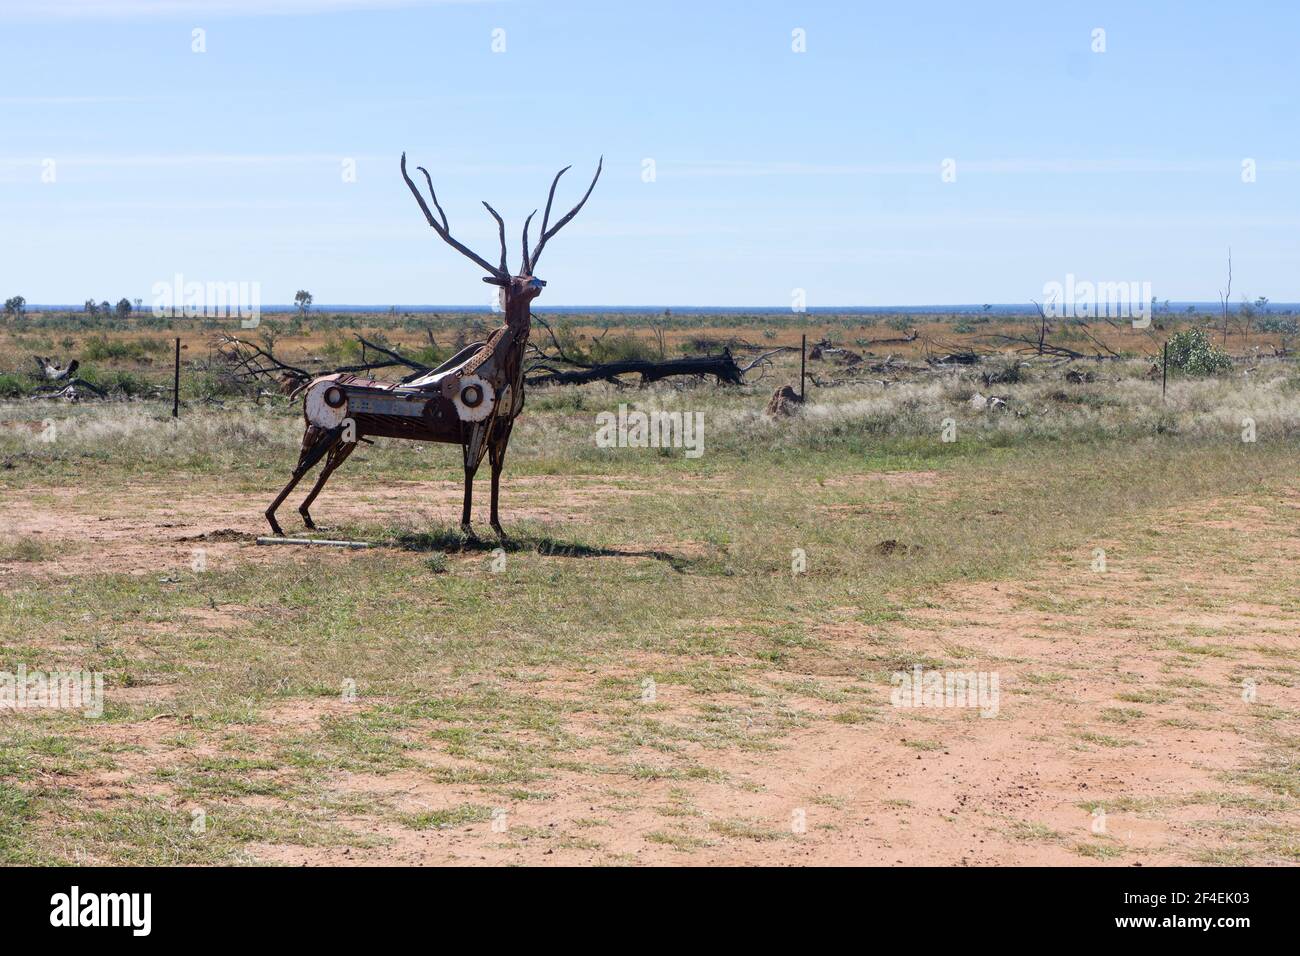 Scrap metal sculpture of a stag near Aramac, outback Queensland, Australia on the Lake Dunn sculpture trail created for tourists. Stock Photo